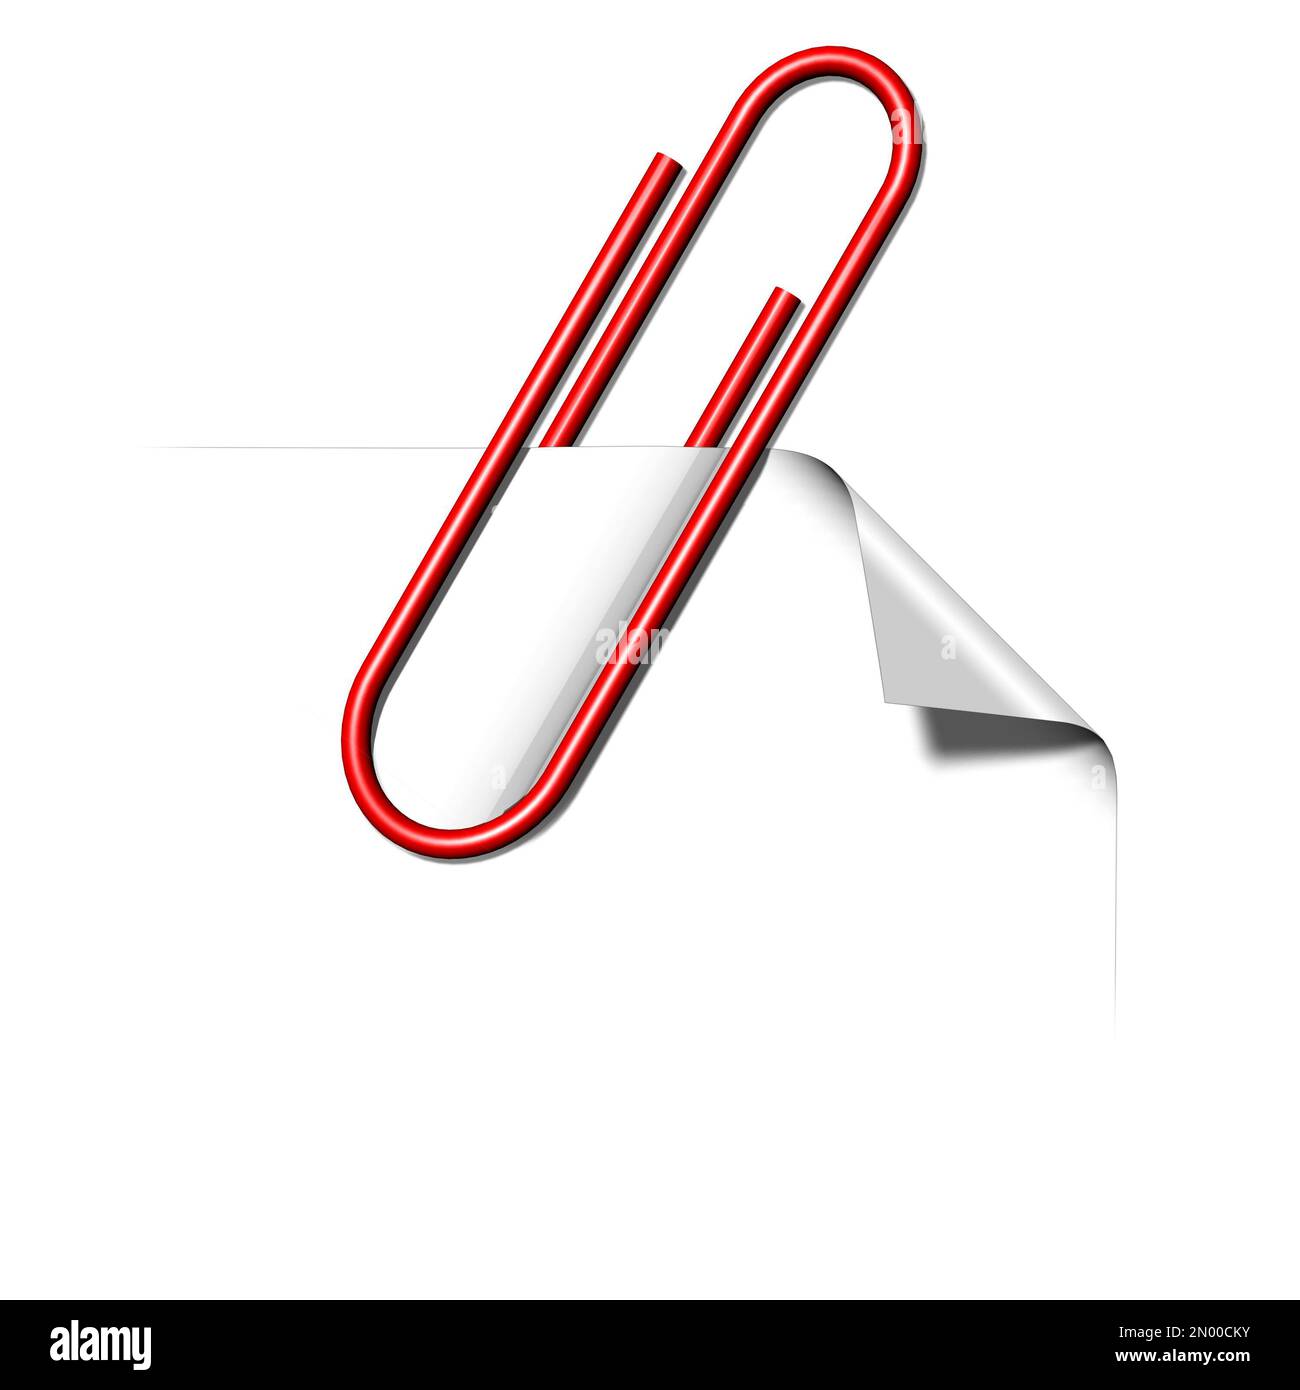 Isolated Paper Clip With Path Stock Photo - Download Image Now